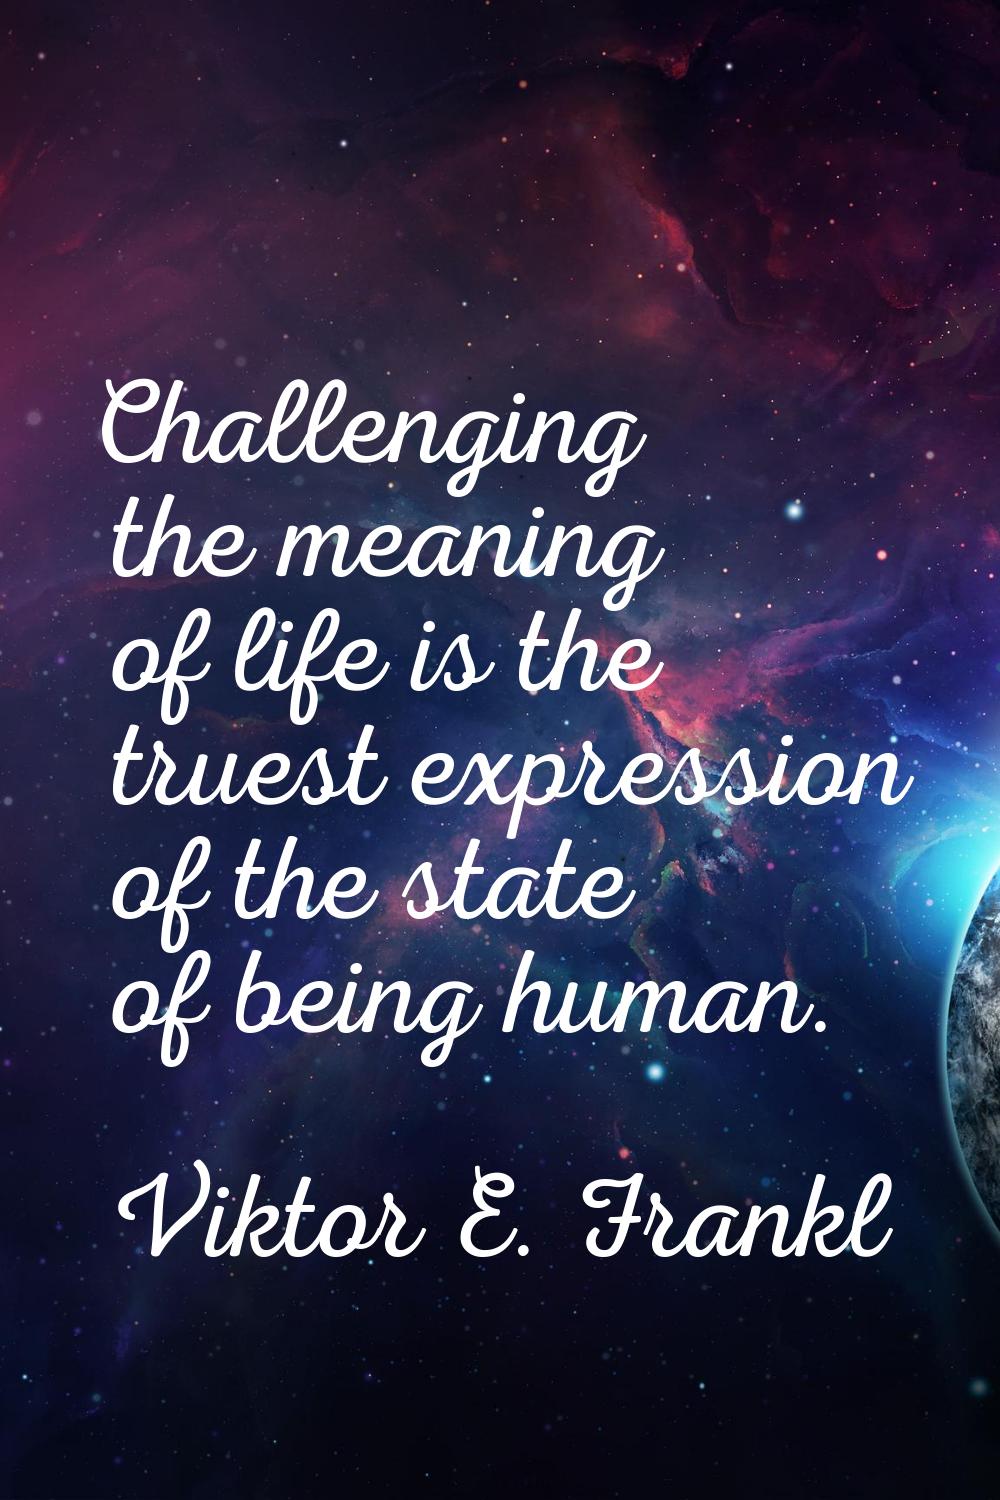 Challenging the meaning of life is the truest expression of the state of being human.